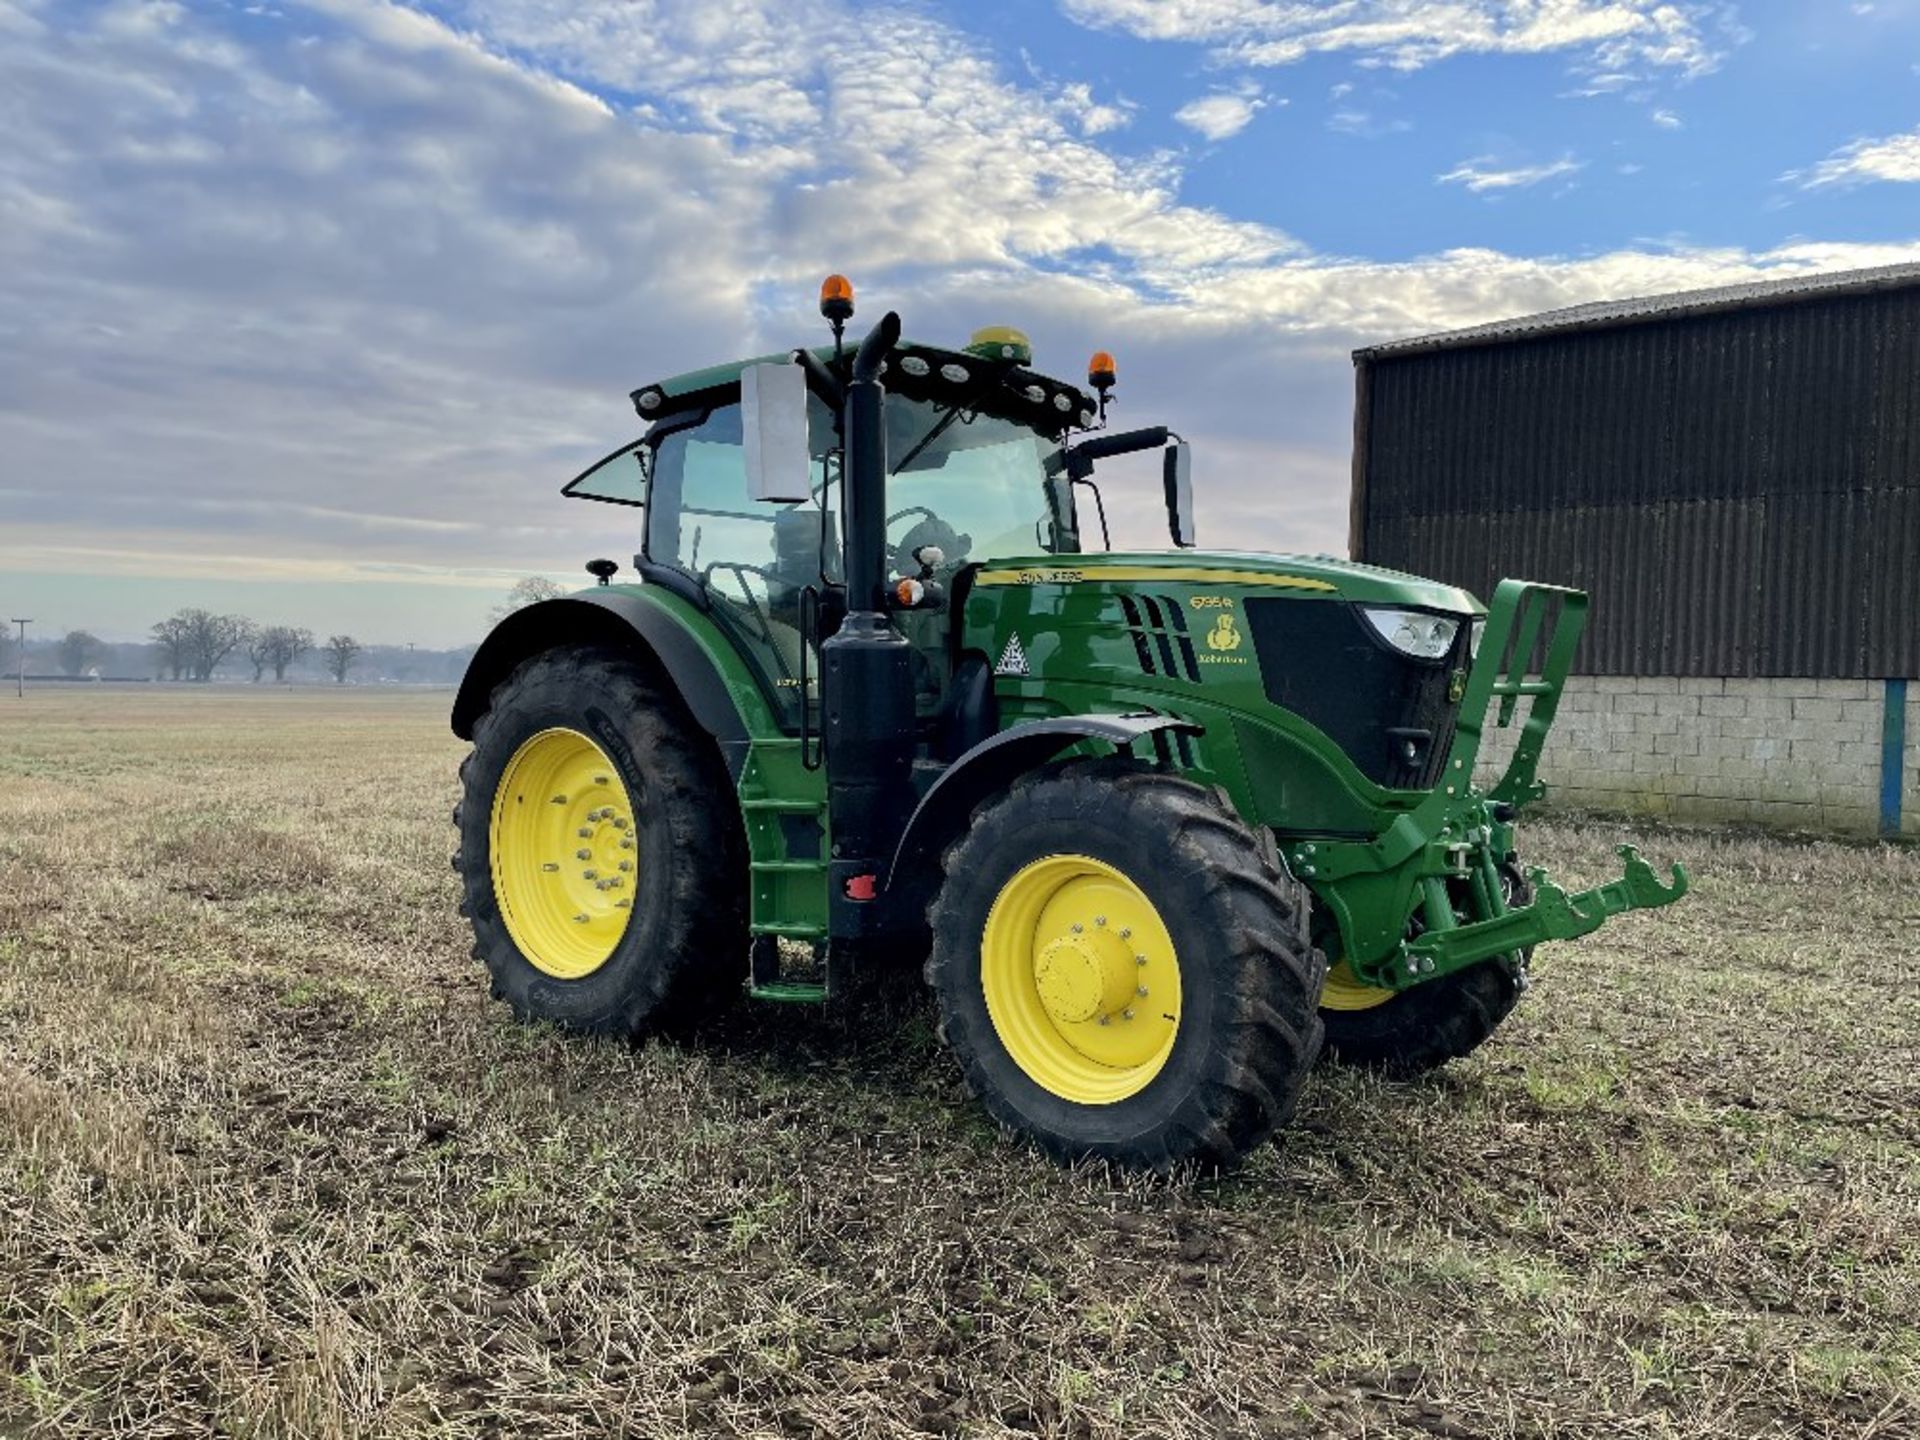 2018 John Deere 6195R 4wd Tractor (Ultimate Edition), approx. 1848 hours, Reg No.